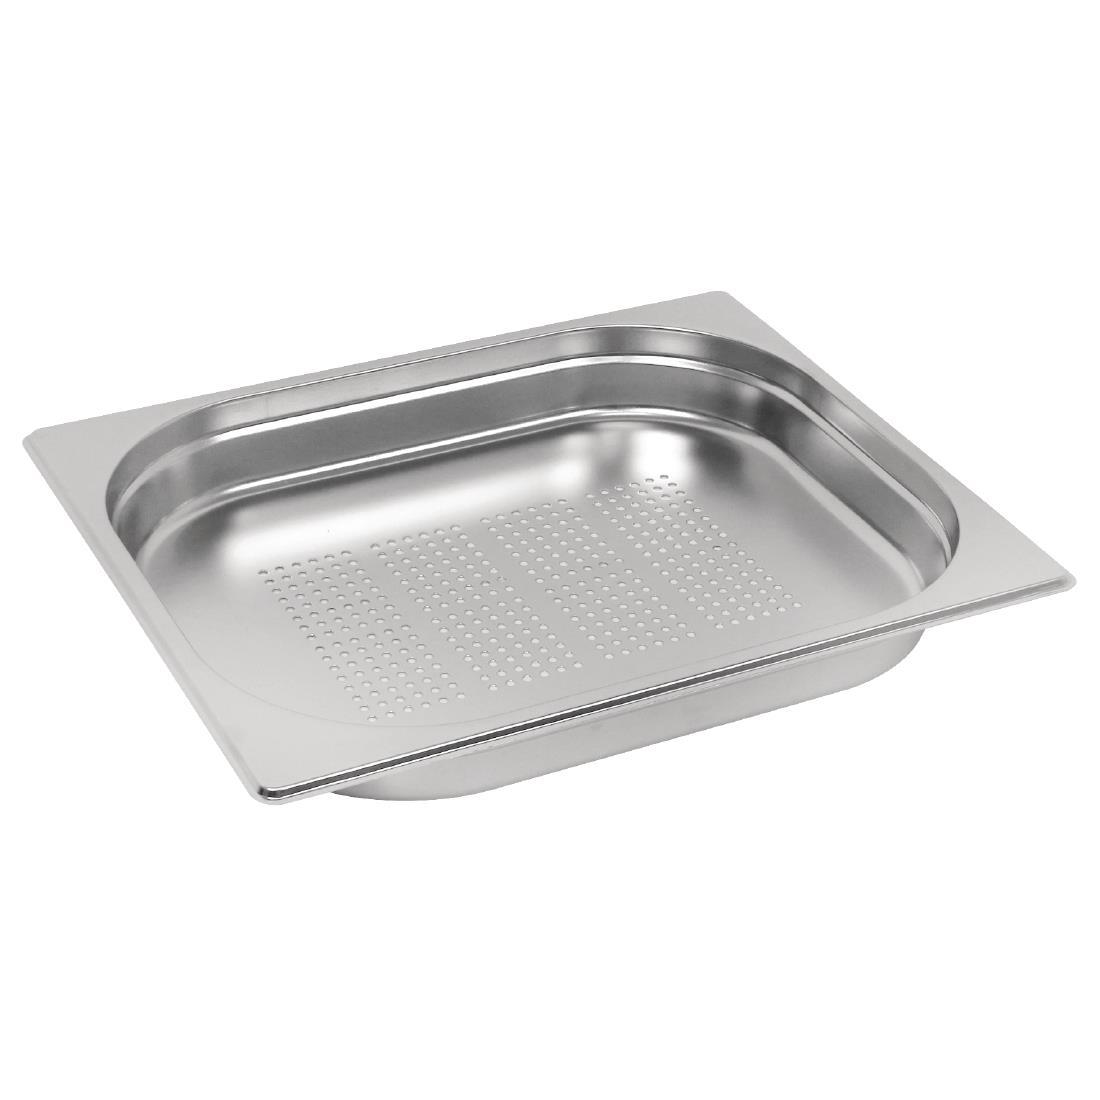 Vogue Stainless Steel Perforated 1/2 Gastronorm Pan 40mm - E698  - 1